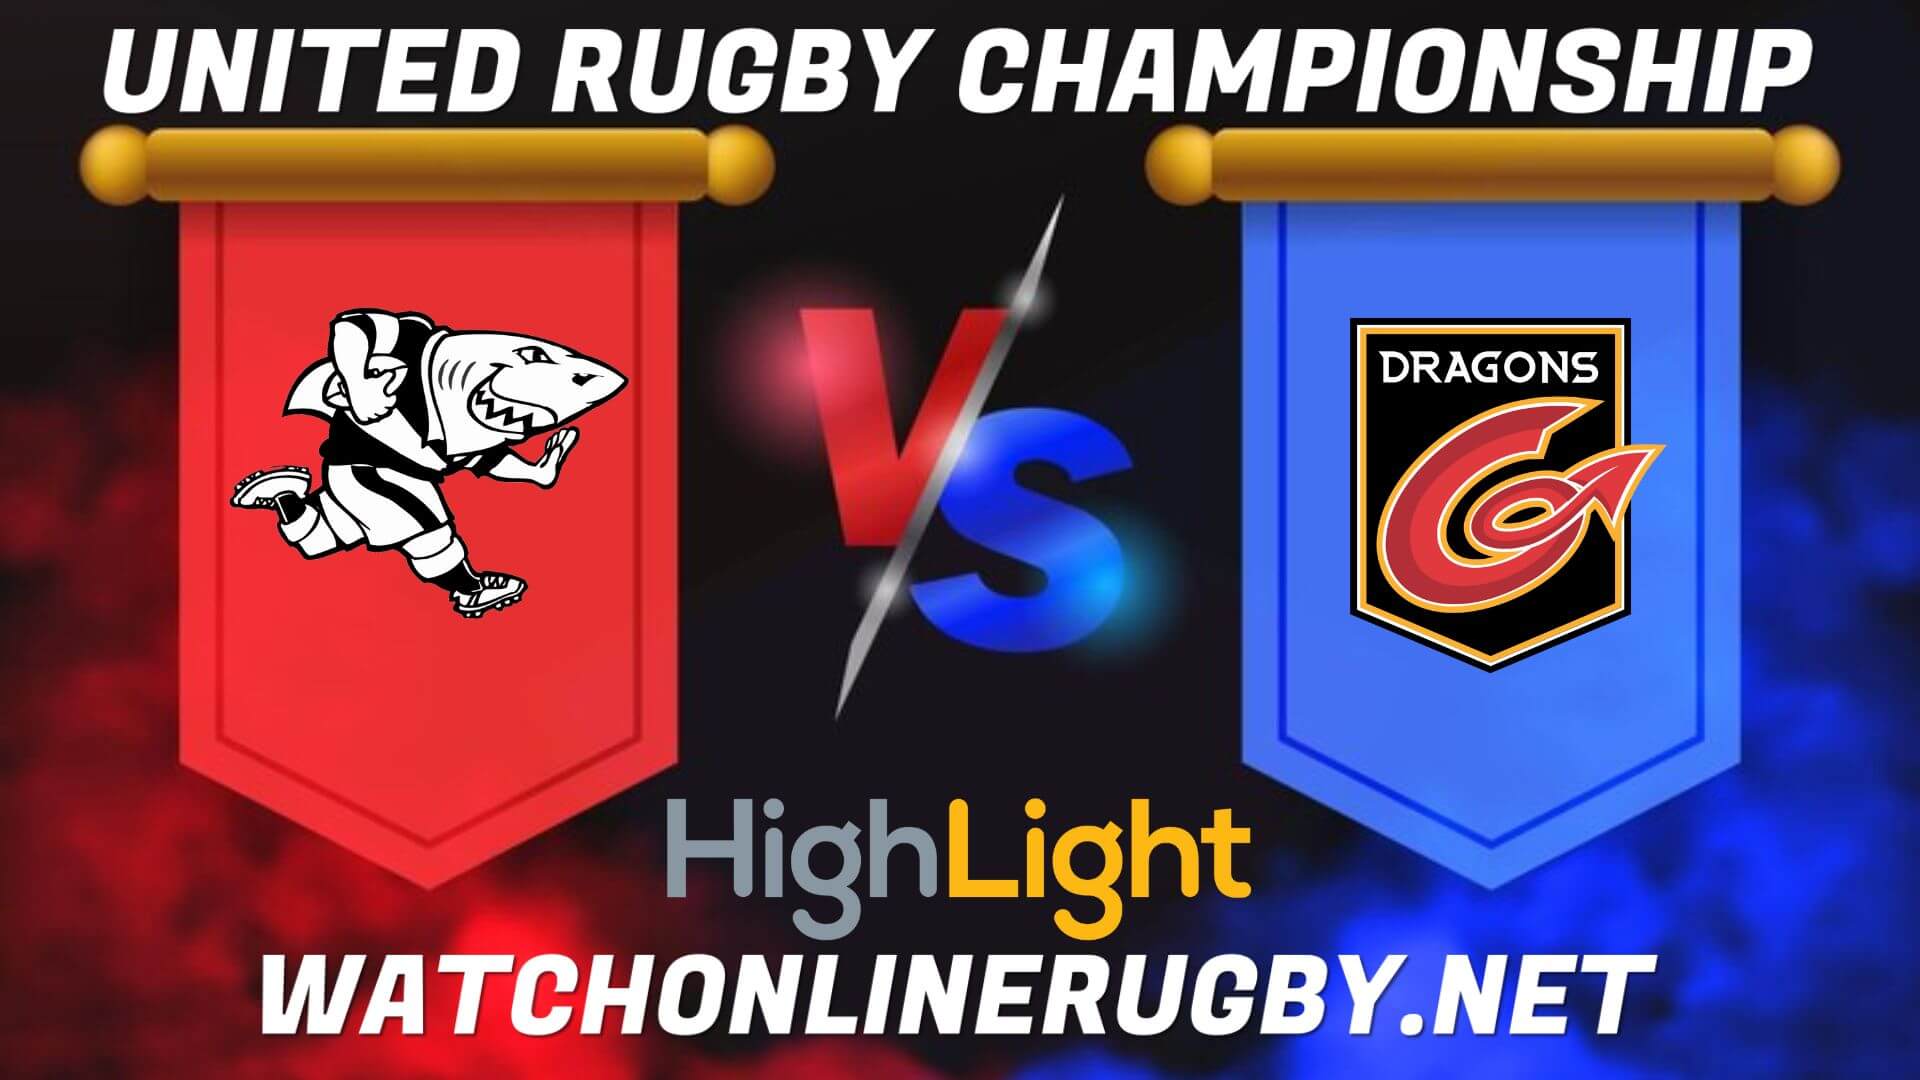 Sharks Vs Dragons United Rugby Championship 2022 RD 15